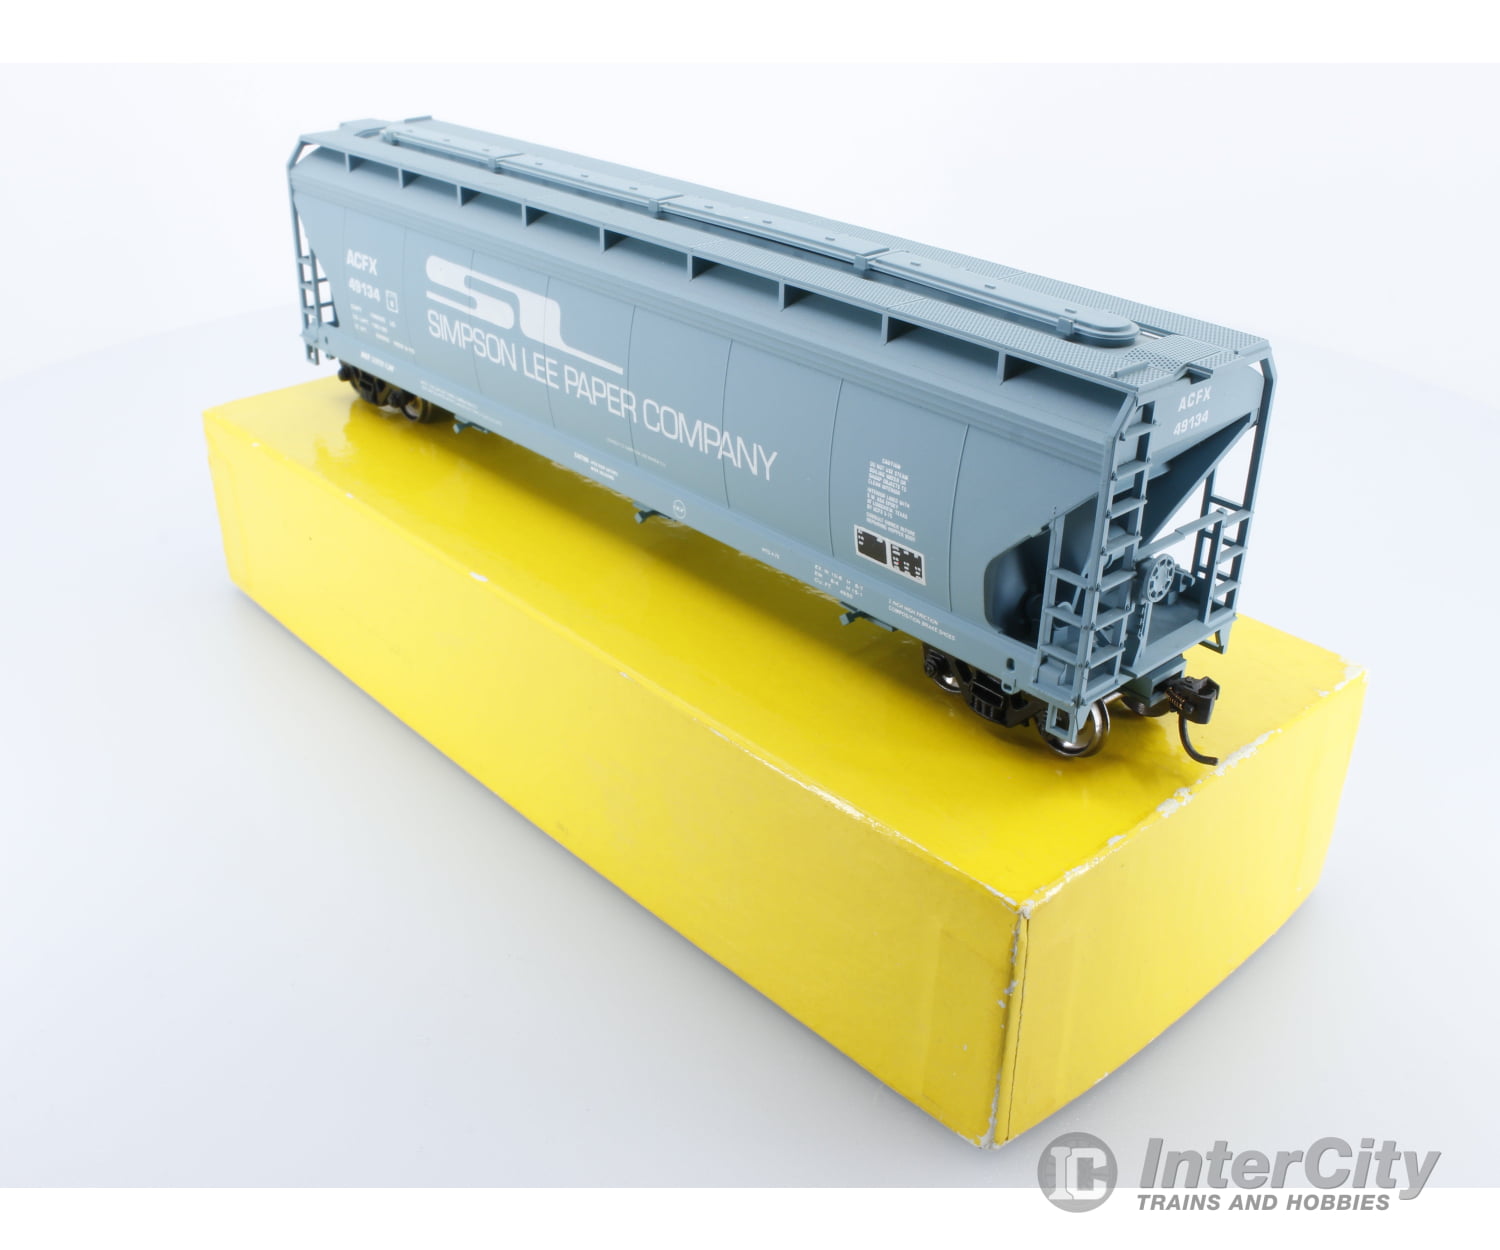 Accurail Acf 3 Bay Center Flow Simpson Lee Paper Company Acfx 49134 Freight Cars